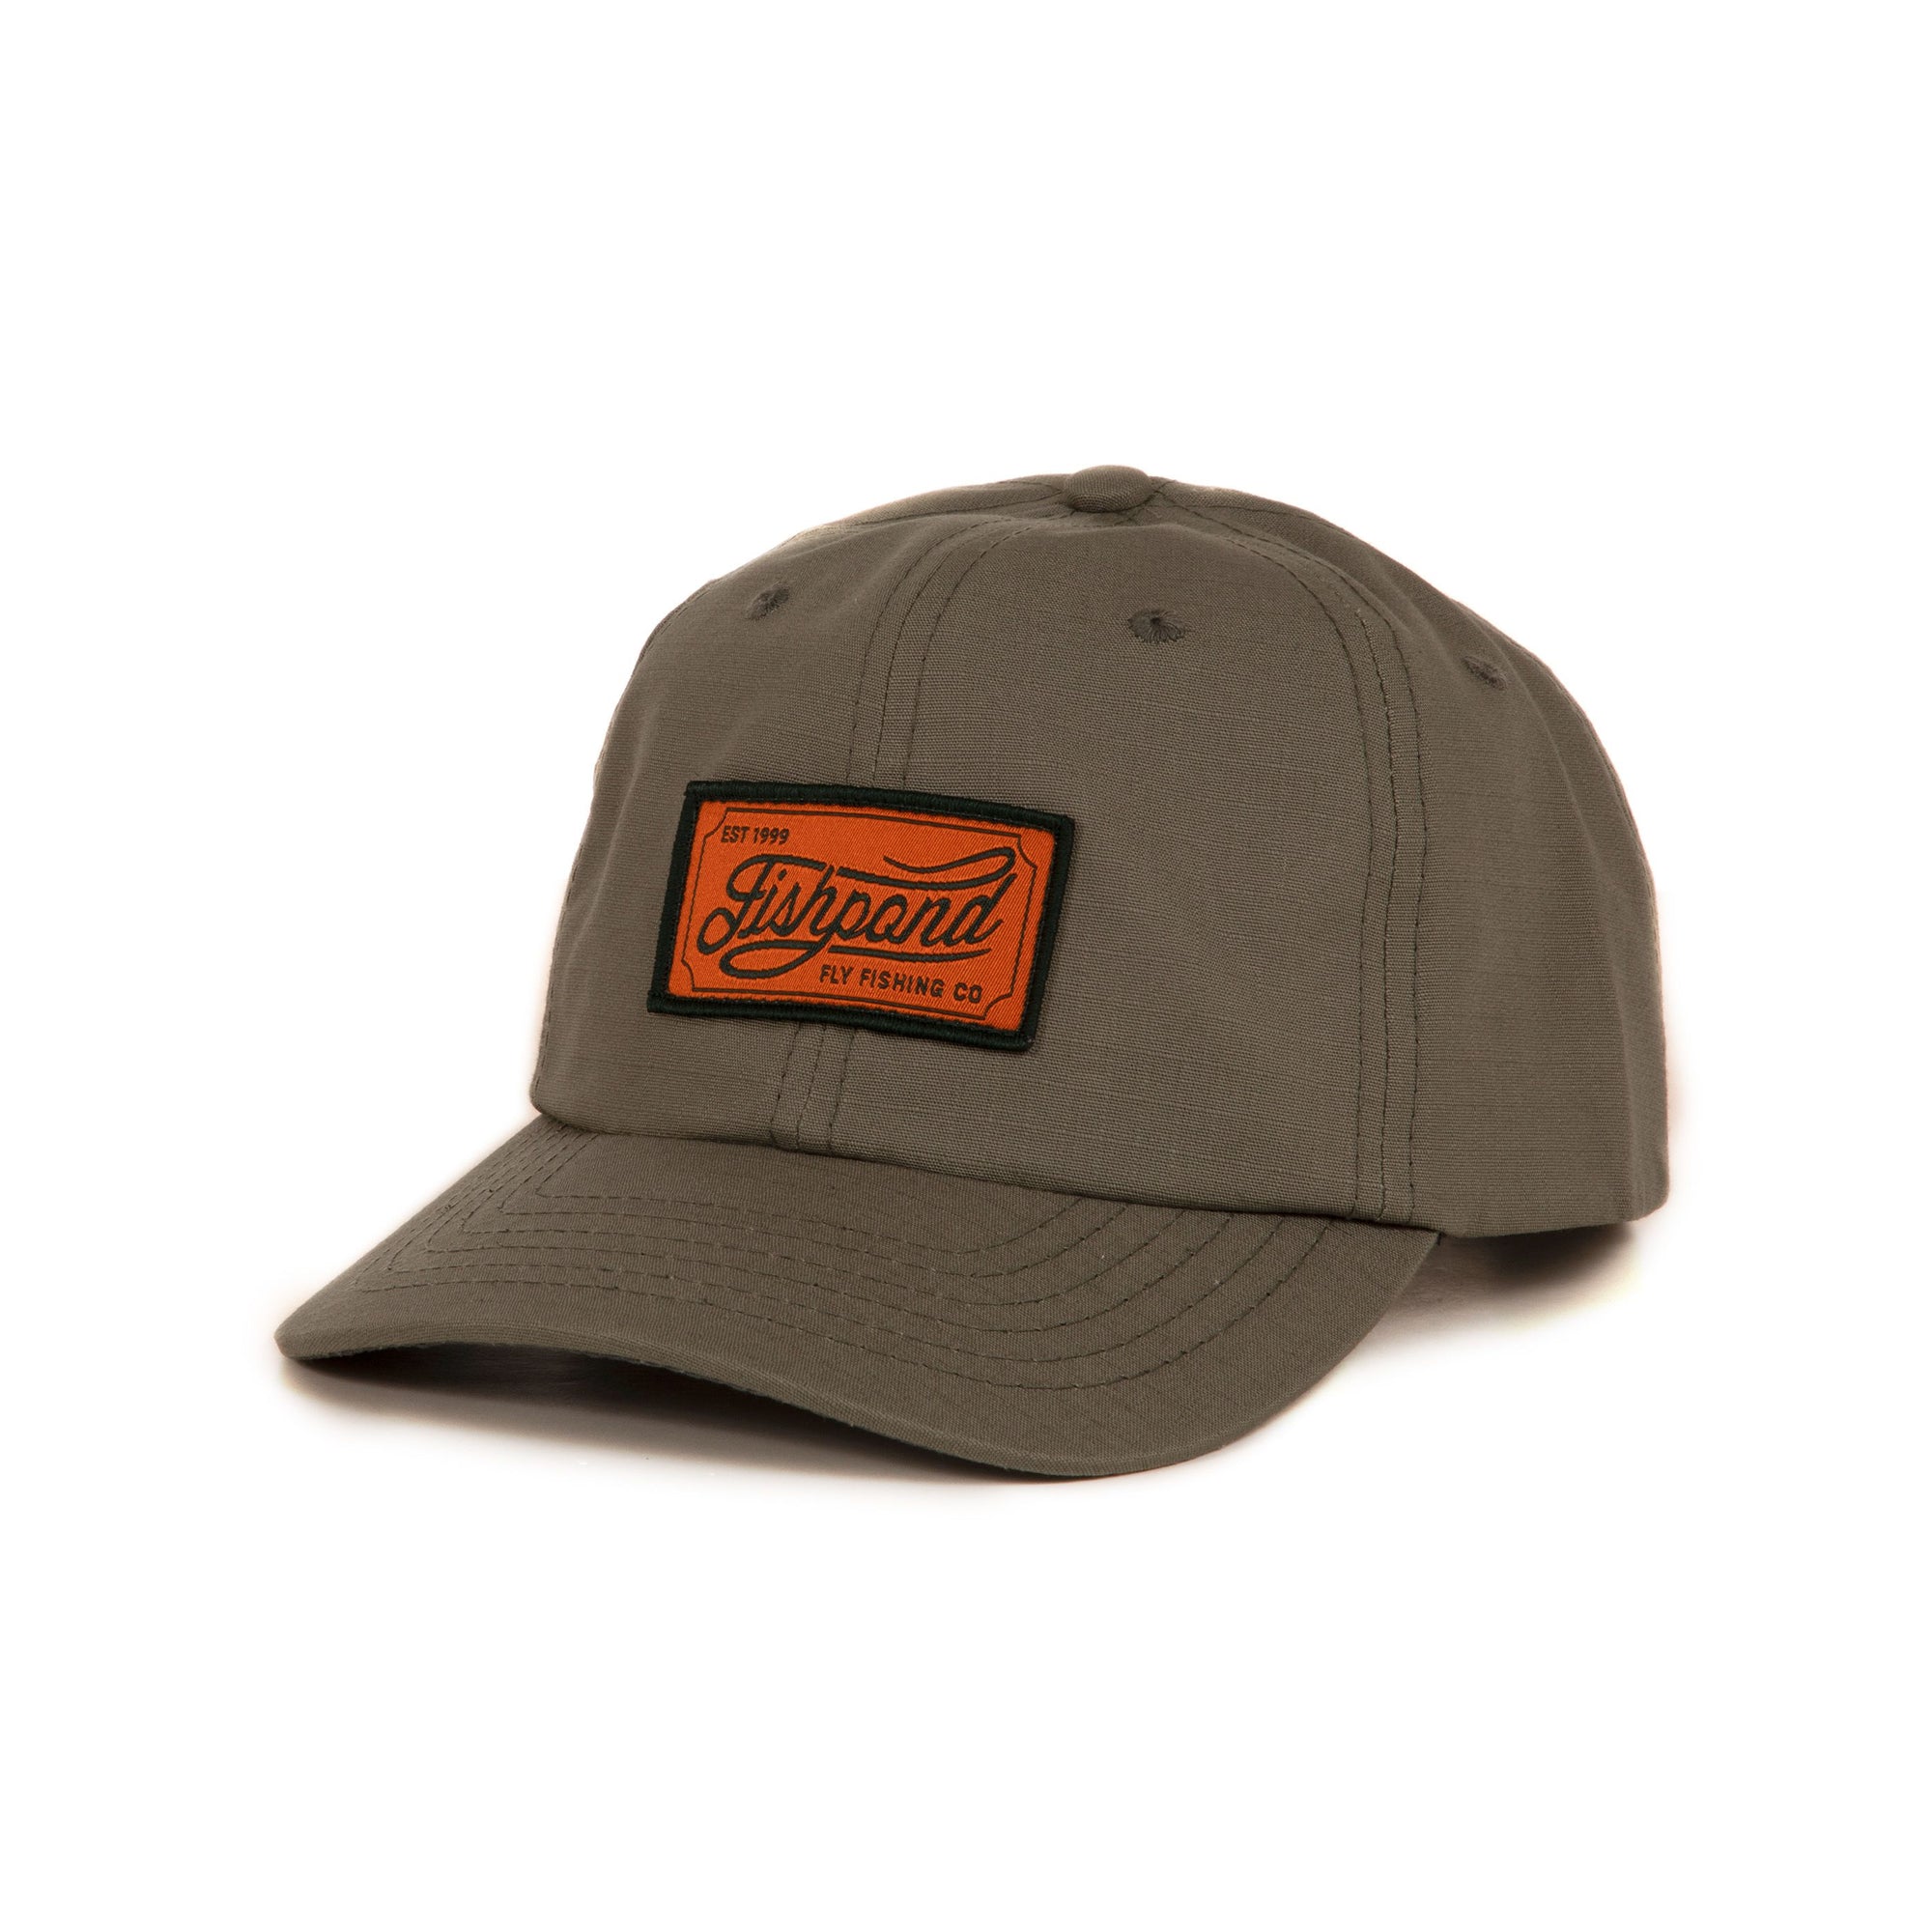 Products Tagged Hats - Ashland Fly Shop